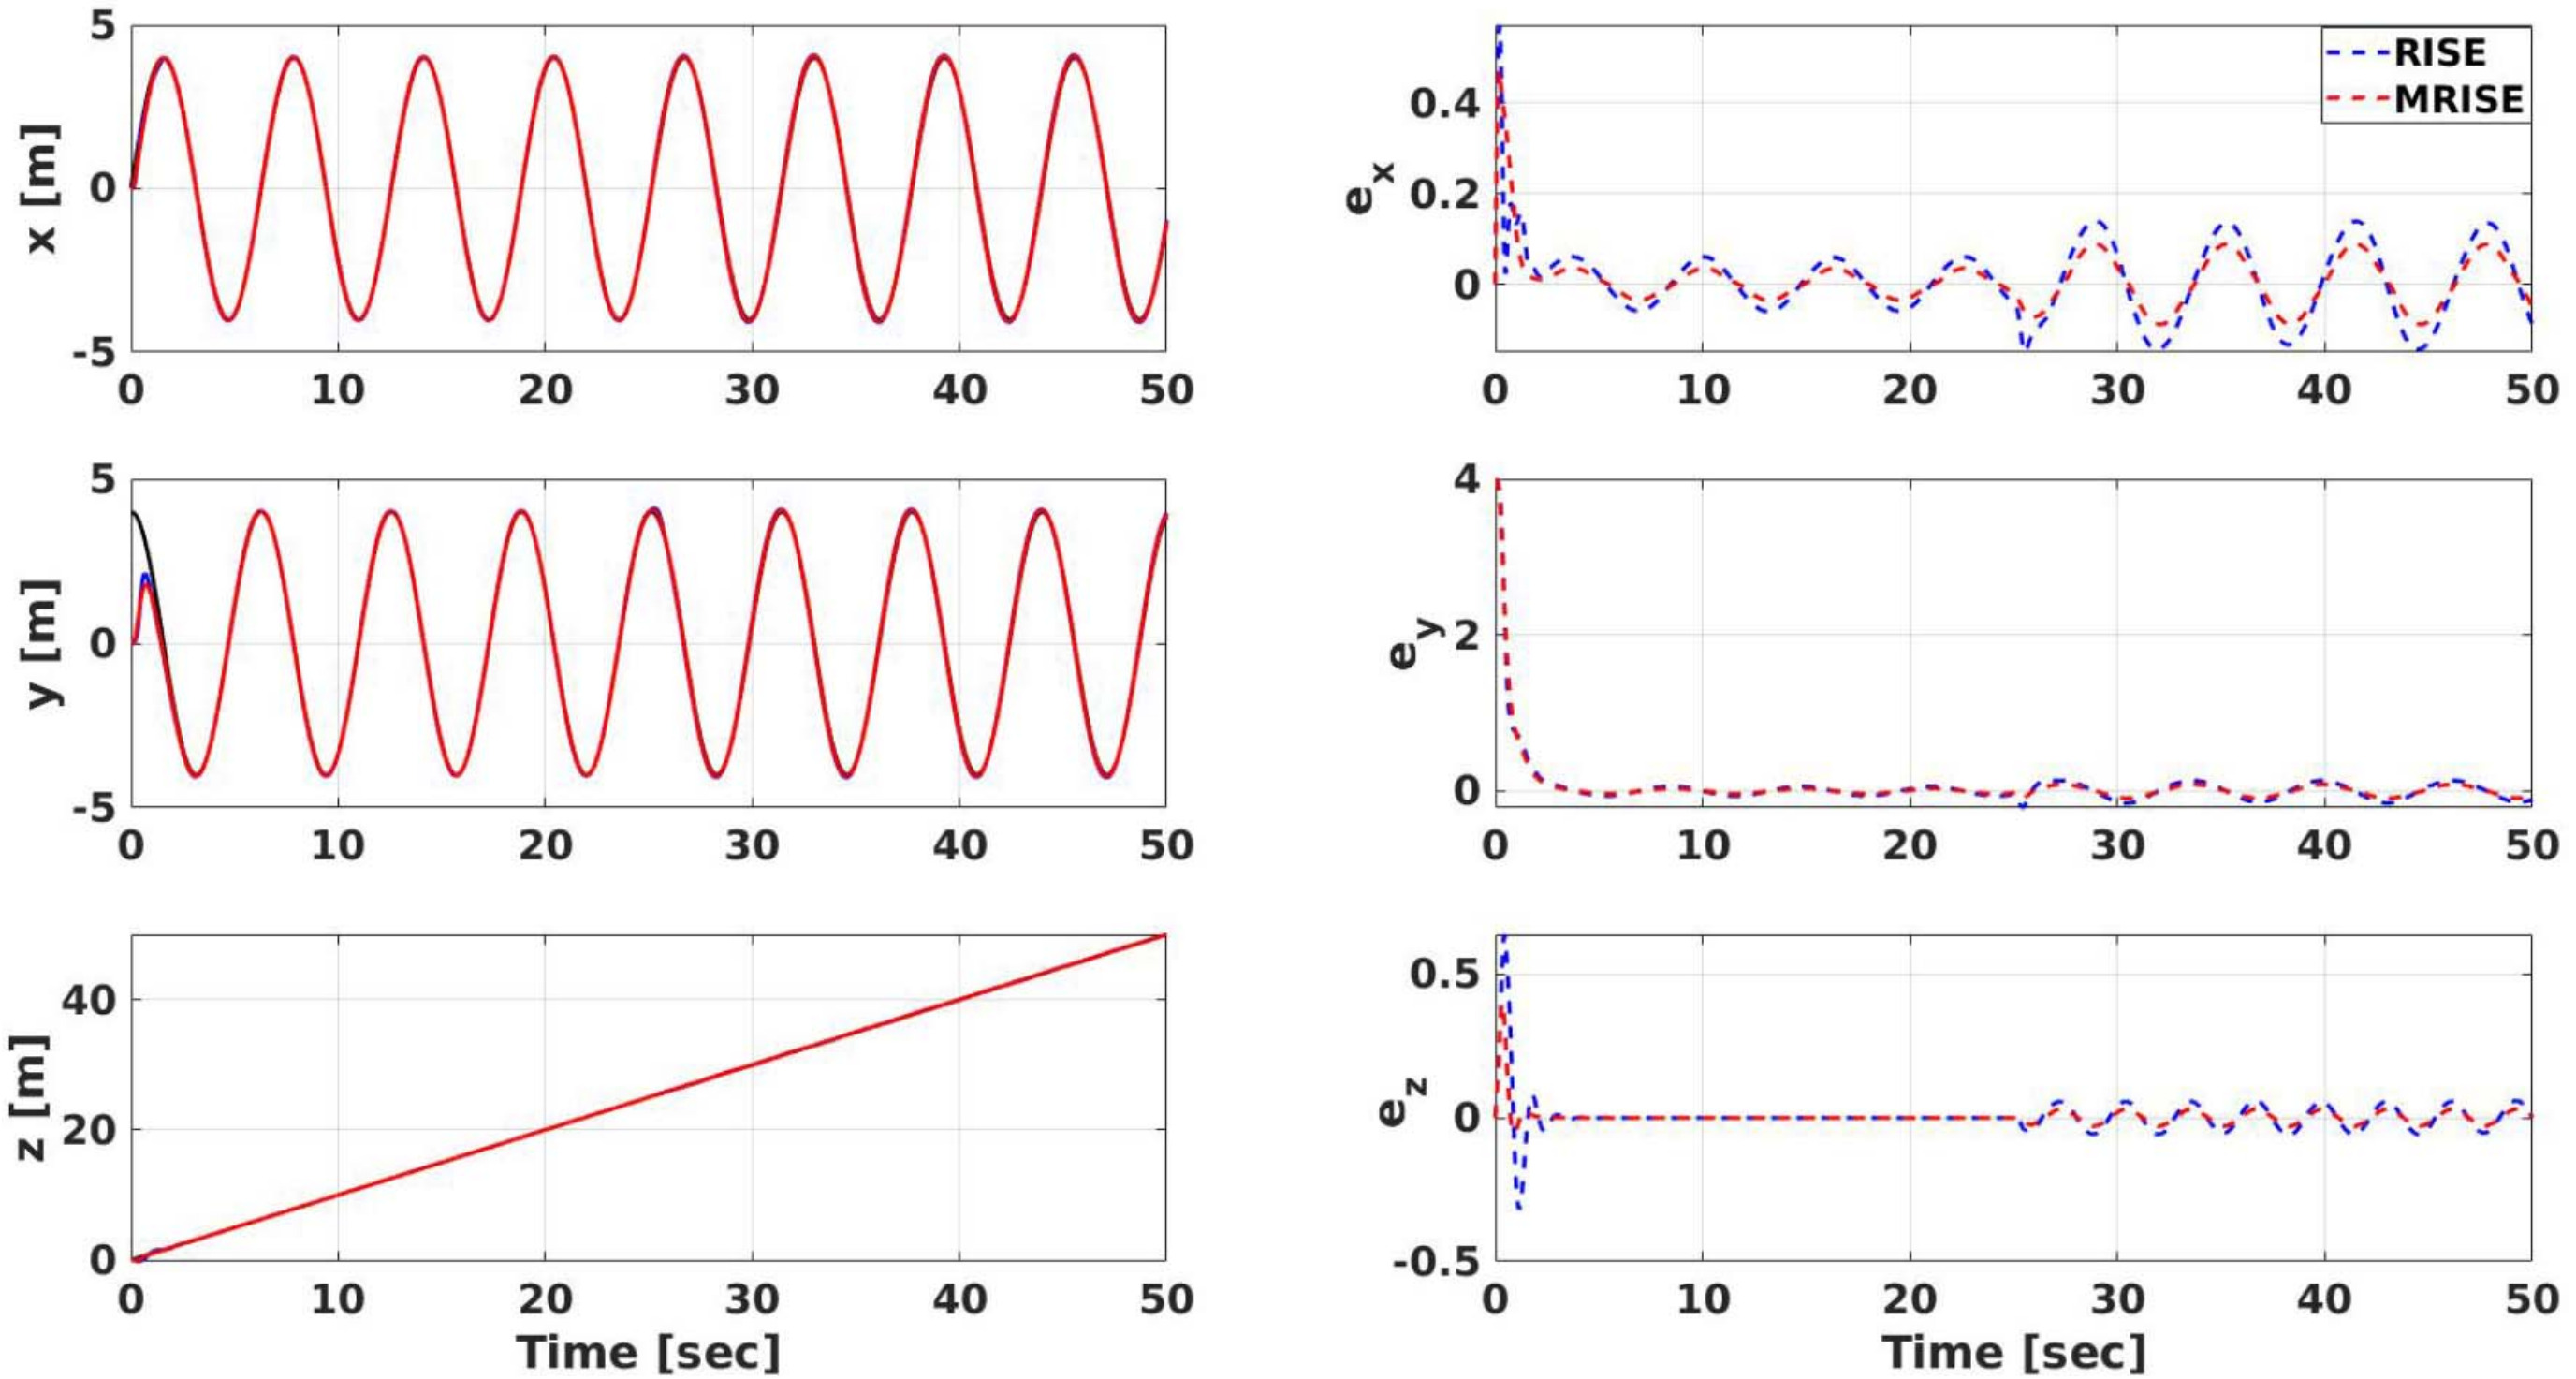 Robust Nonlinear Control-Based Trajectory Tracking for Quadrotors Under Uncertainty